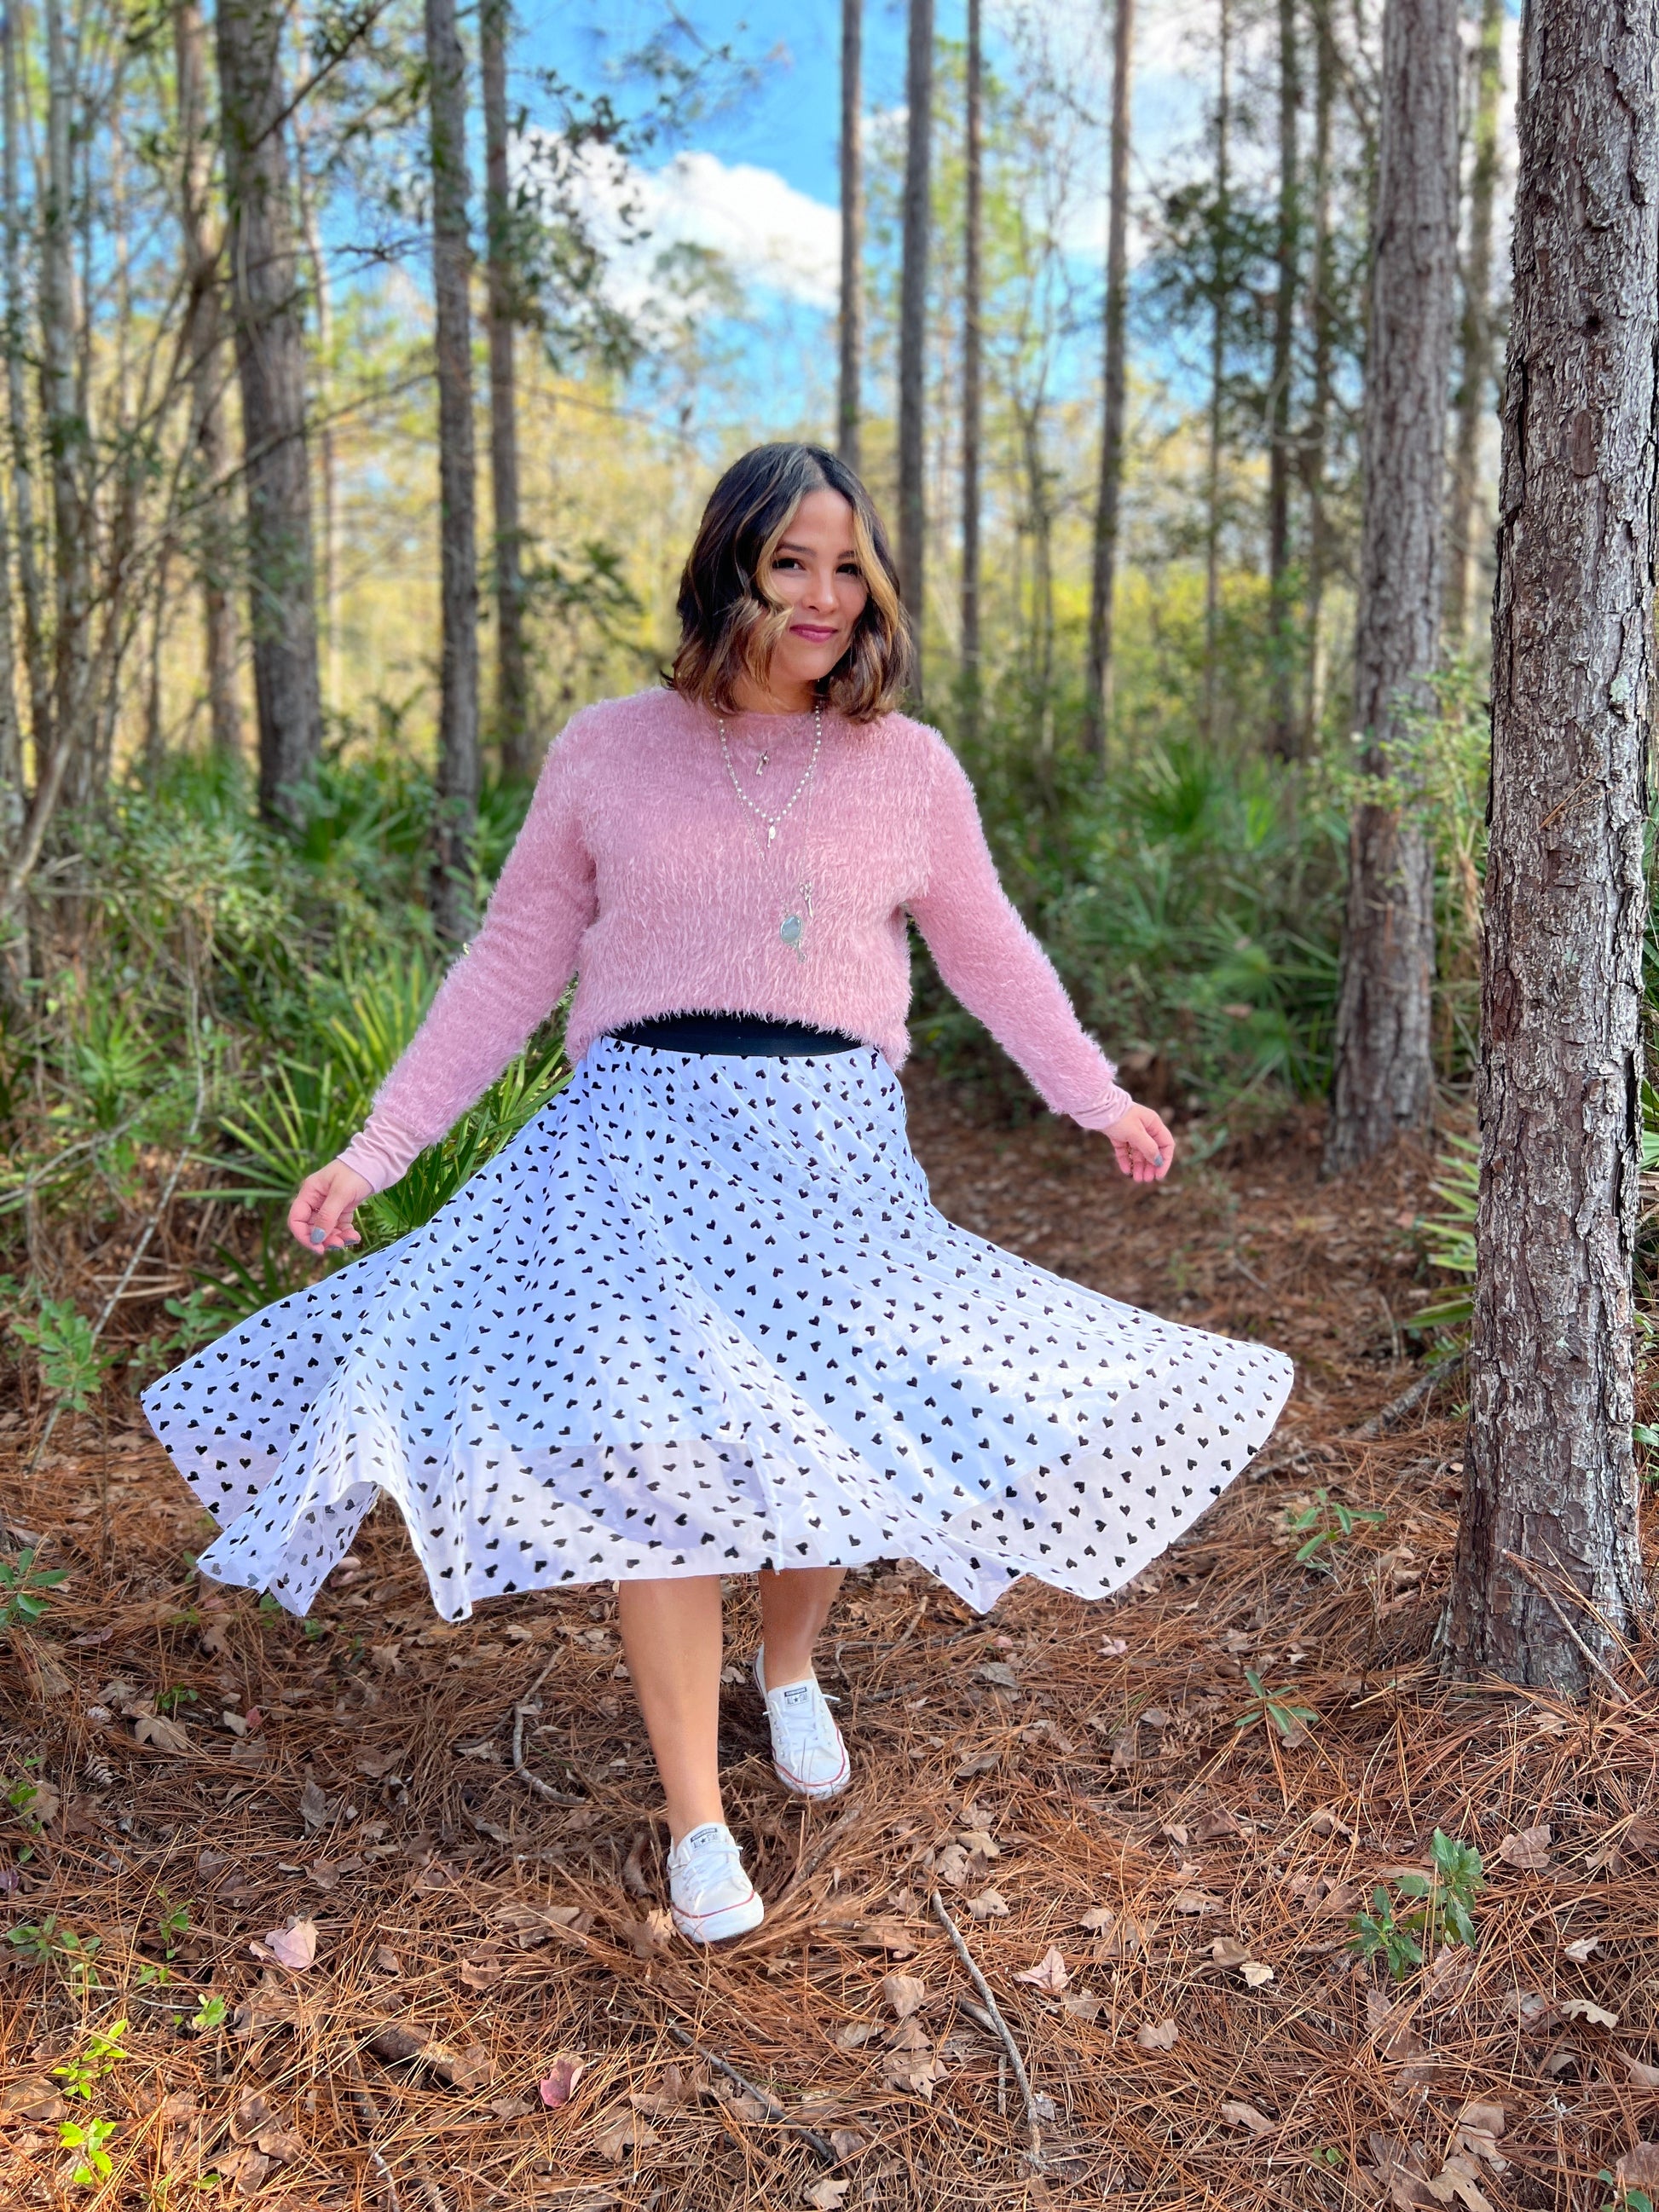 Woman twirling her white and black enchanted overlay skirt wearing a pink sweater on a trail in the woods